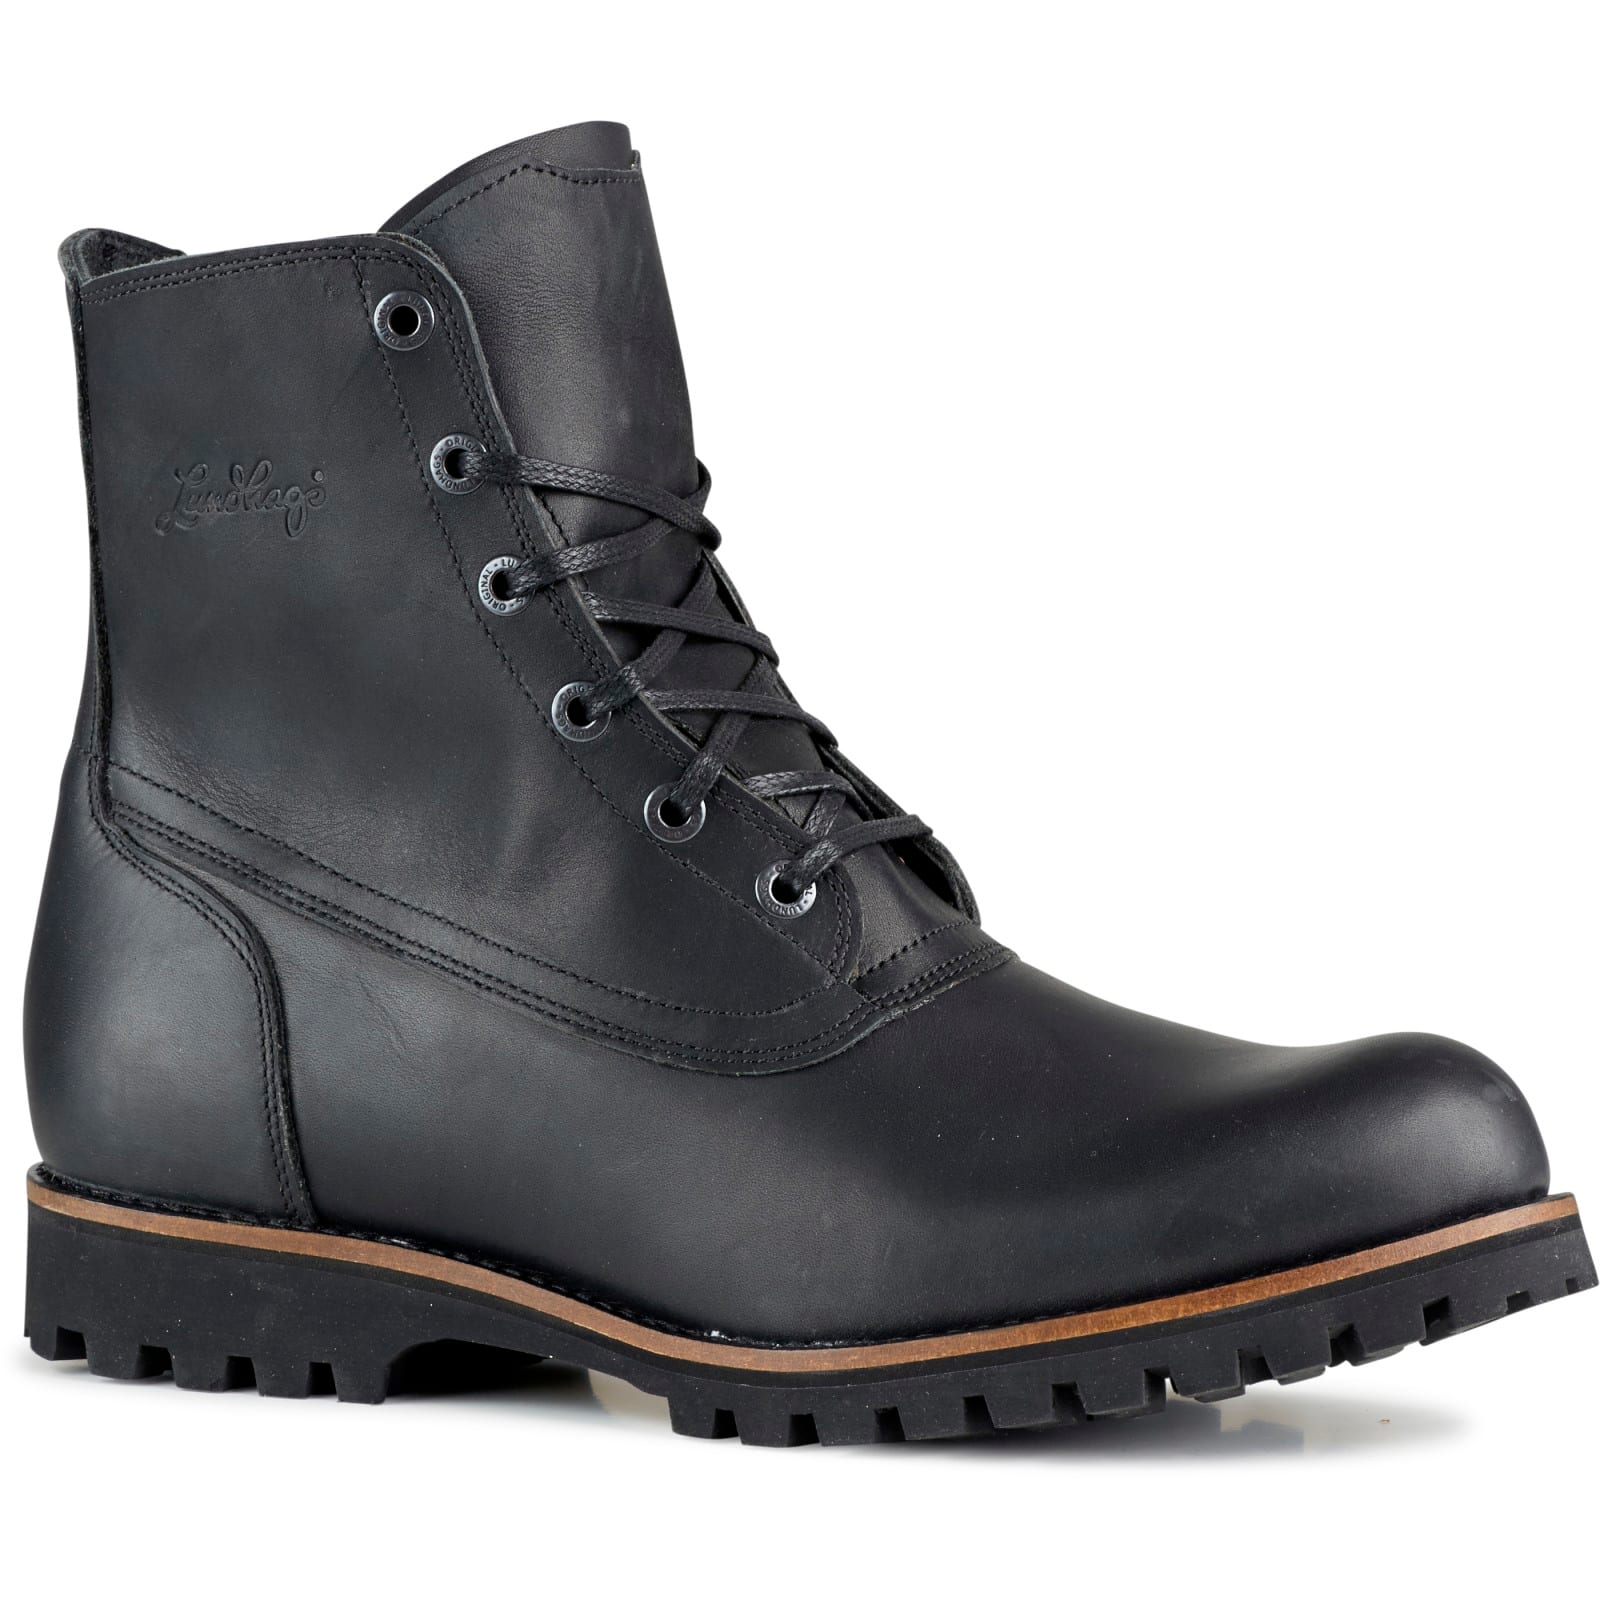 Legeme repertoire præmedicinering Buy Lundhags Tanner Boot from Outnorth